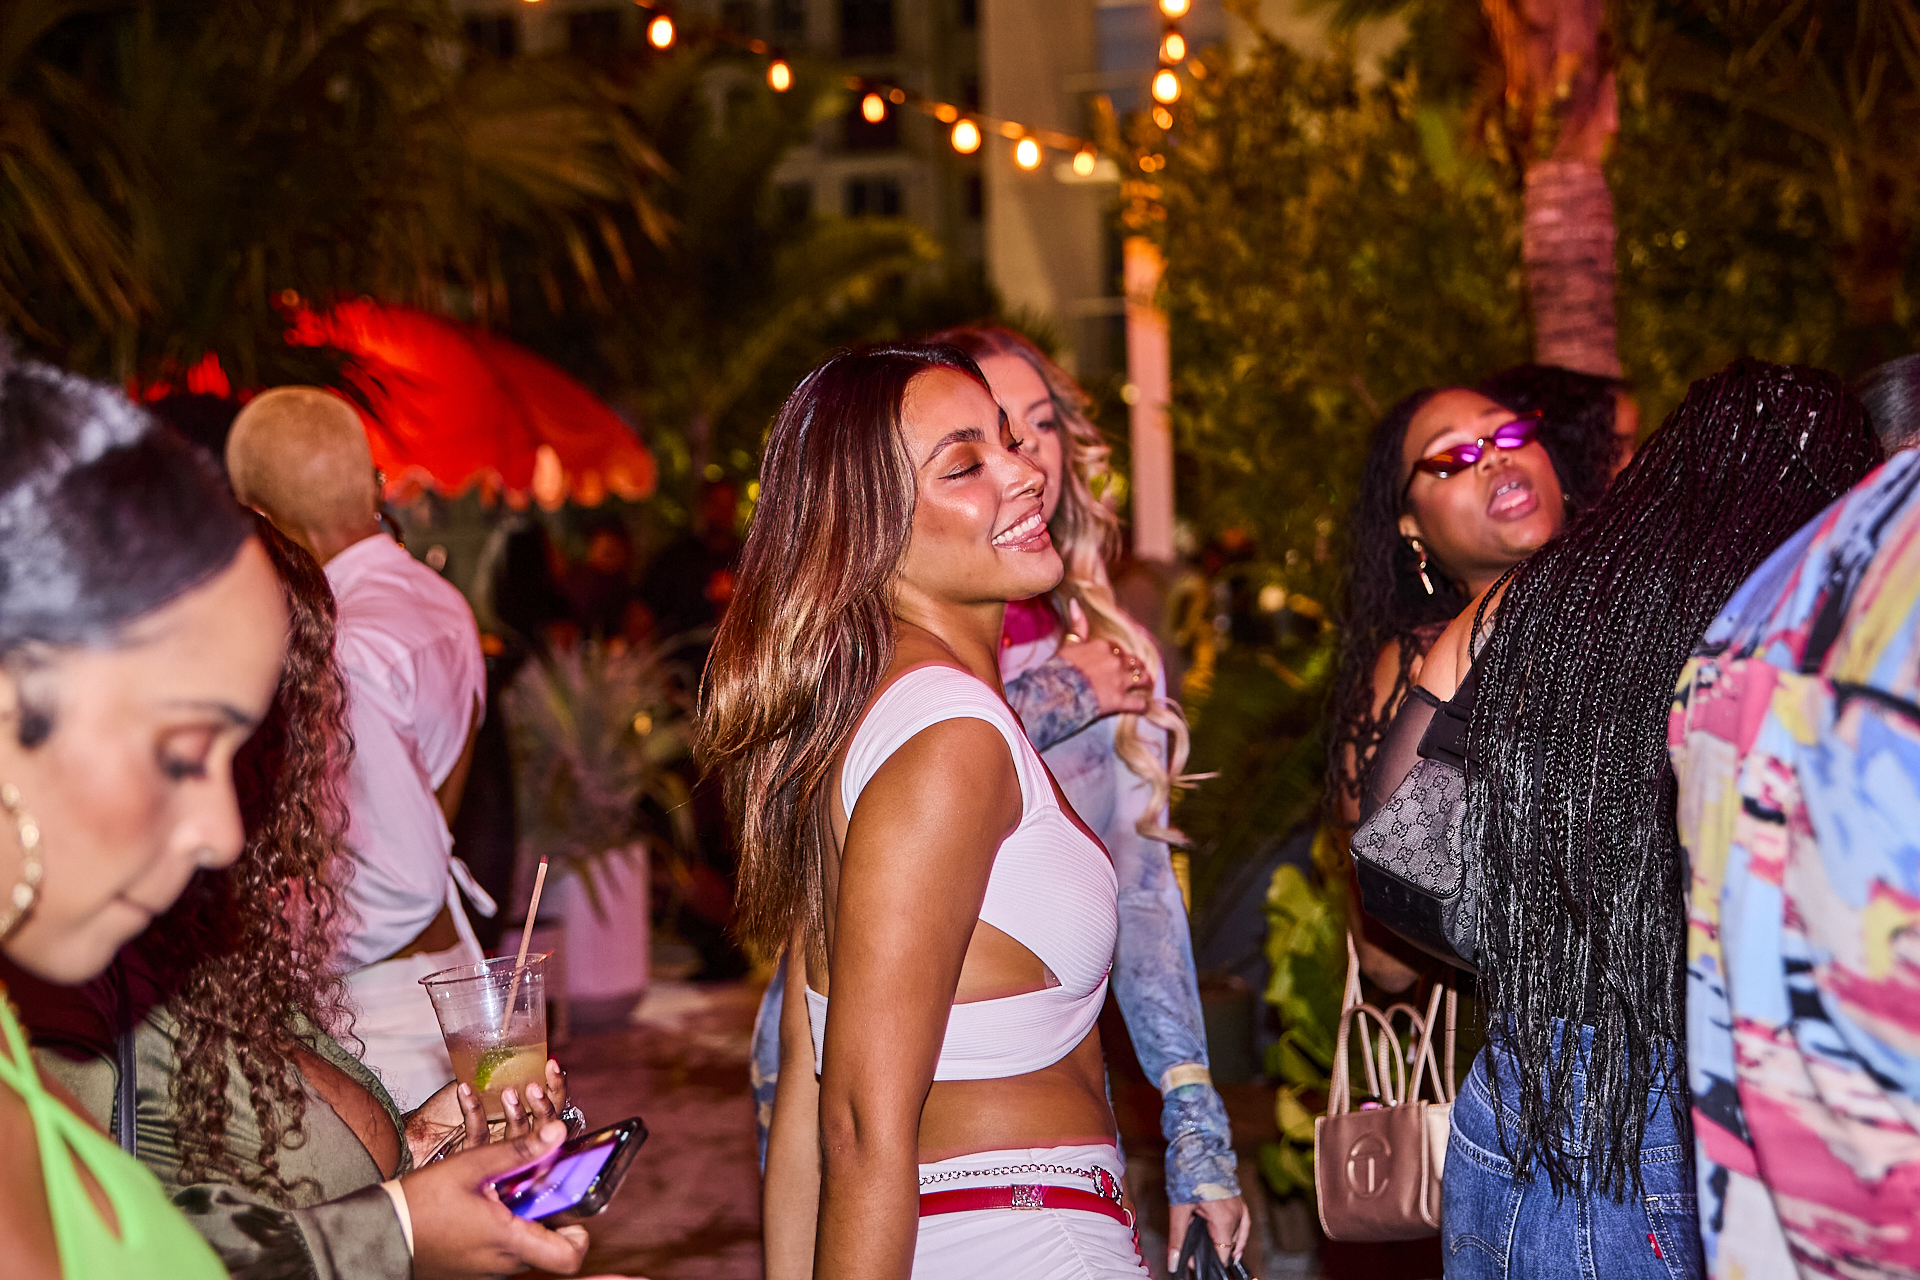 A group of people gathered at an outdoor nighttime event, some laughing and talking. One woman in the center is smiling, while others around her are engaged in various activities like checking phones.